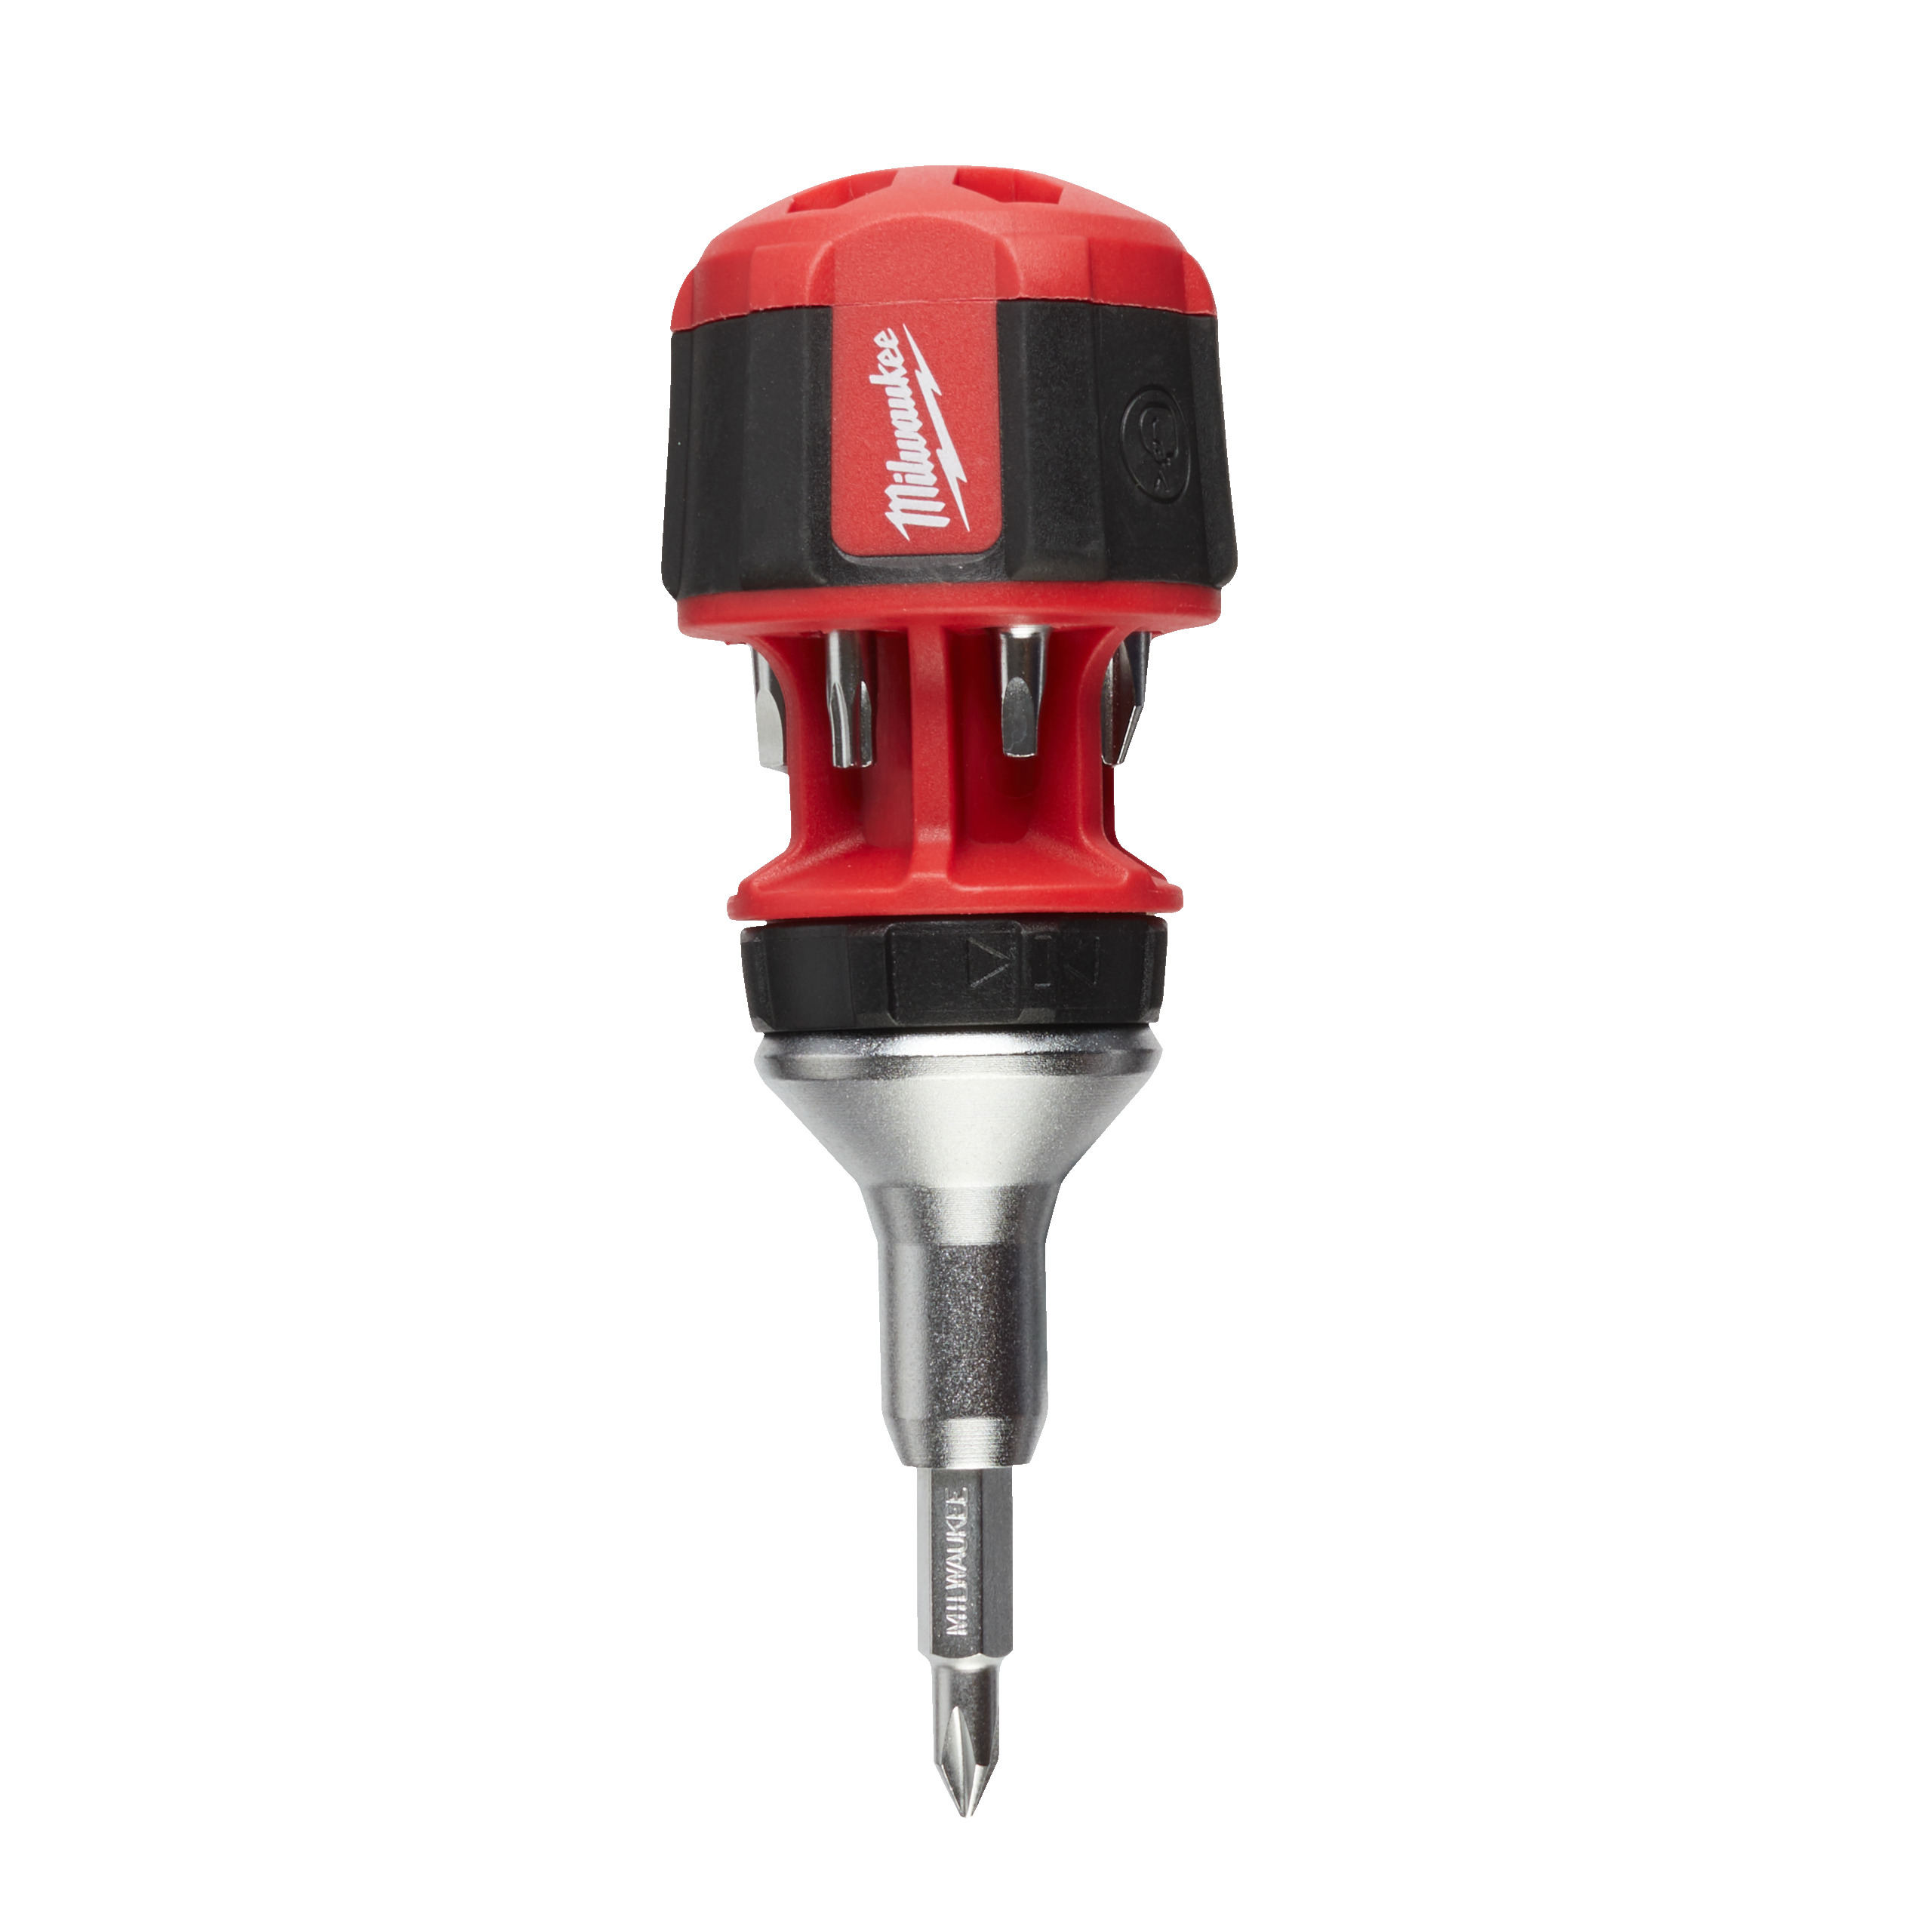 MILWAUKEE 8 in 1 Compact Ratcheting Multi-bit Screwdriver - 1pc